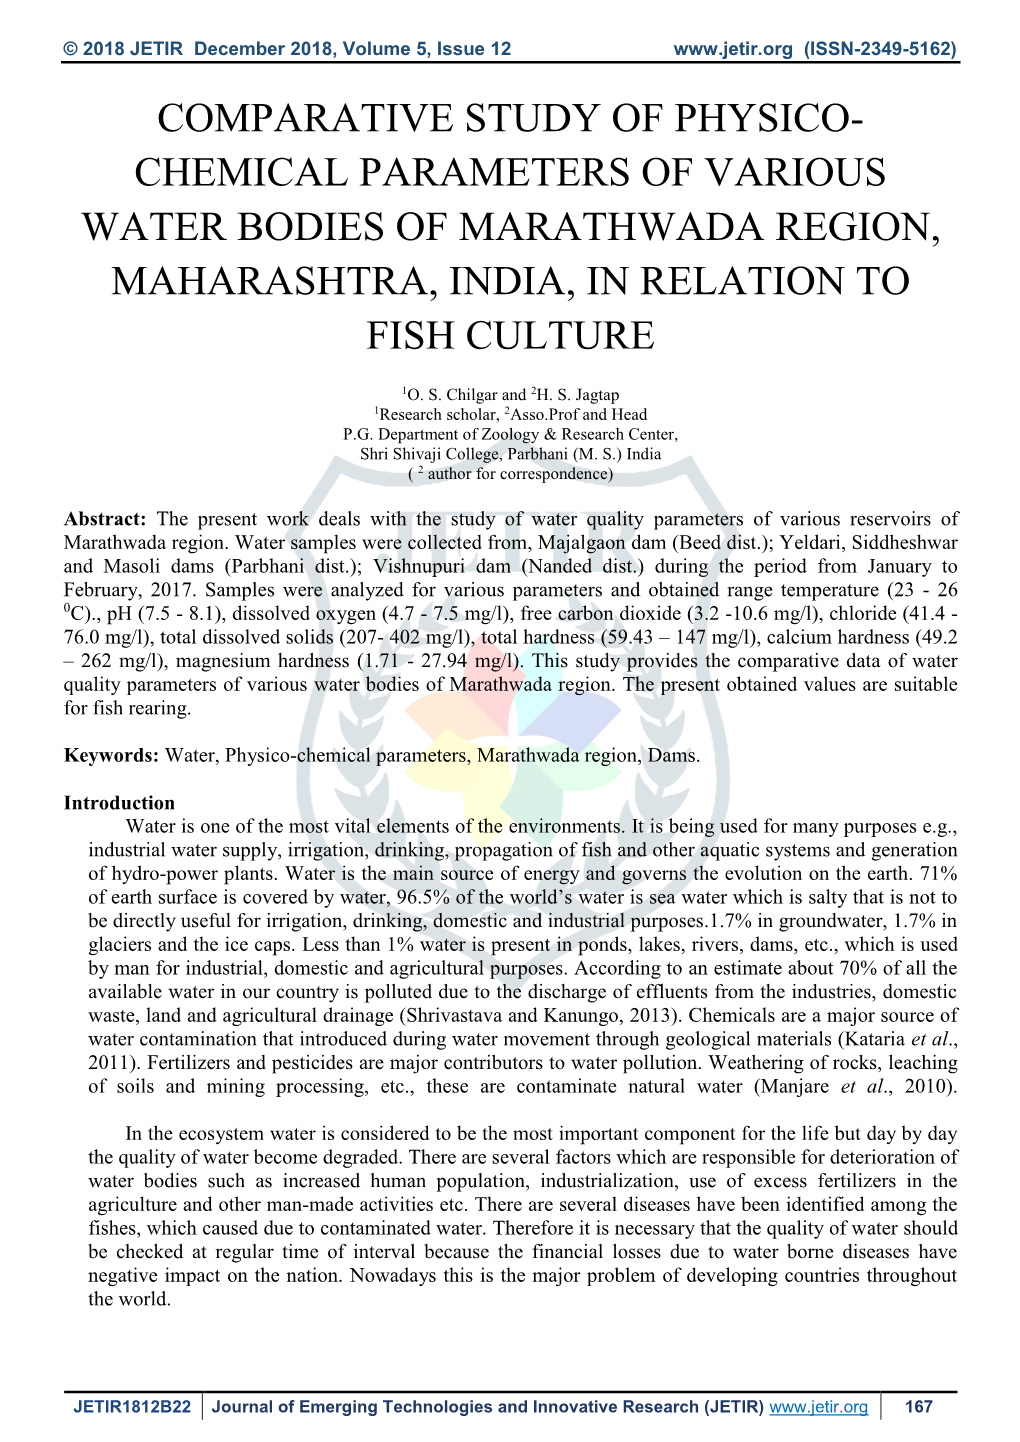 Comparative Study of Physico- Chemical Parameters of Various Water Bodies of Marathwada Region, Maharashtra, India, in Relation to Fish Culture